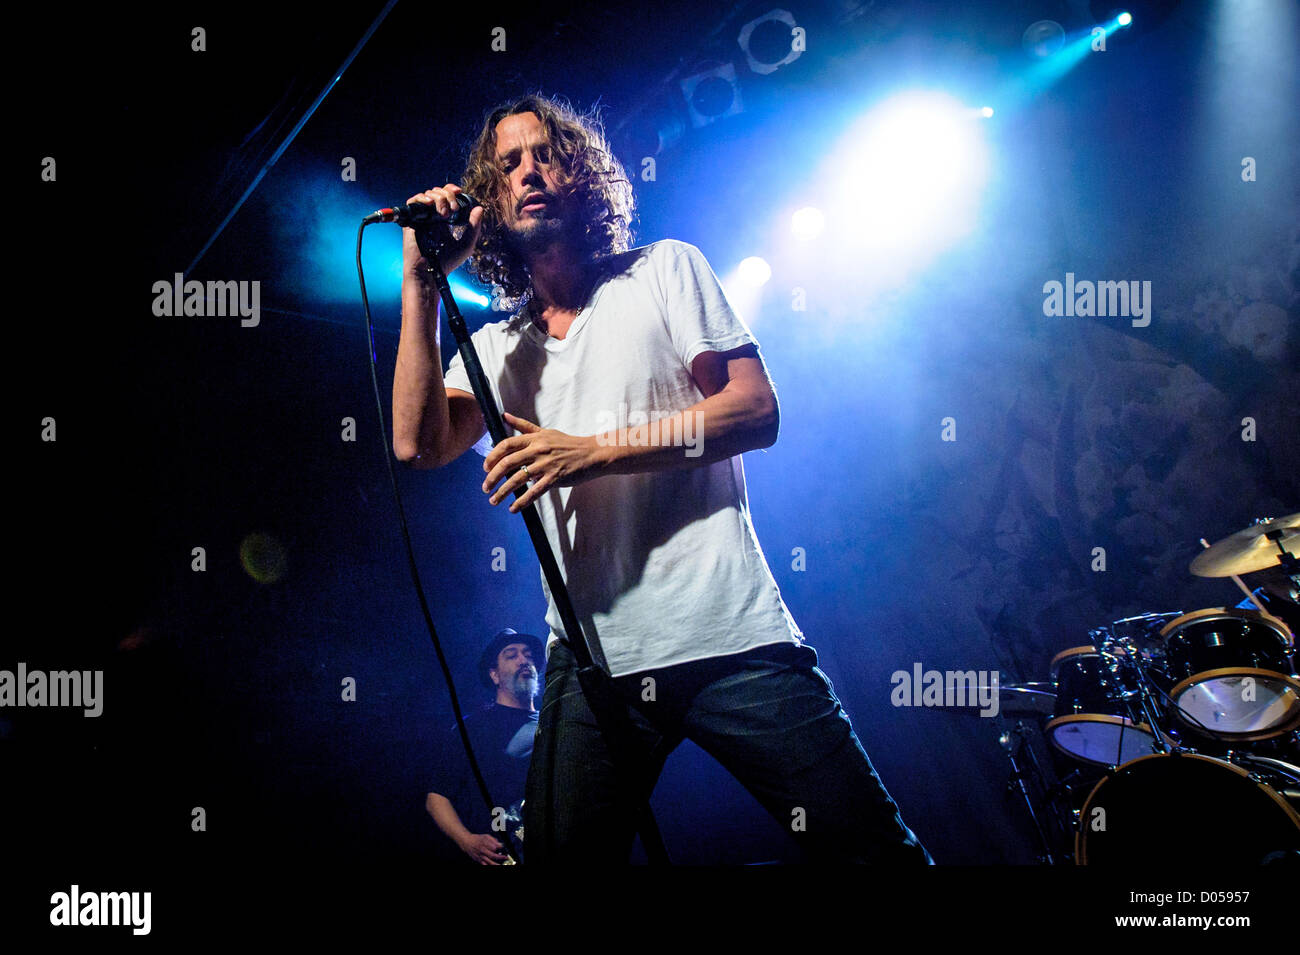 Nov. 16, 2012 - Toronto, Ontario, Canada - Seattle grunge vets Soundgarden touched down at Toronto and the Phoenix Theatre as an intimate warm-up date for their first studio CD in 16 years, 'King Animal', which came out Nov. 13. In picture: CHRIS CORNELL, KIM THAYIL (Credit Image: © Igor Vidyashev/ZUMAPRESS.com) Stock Photo